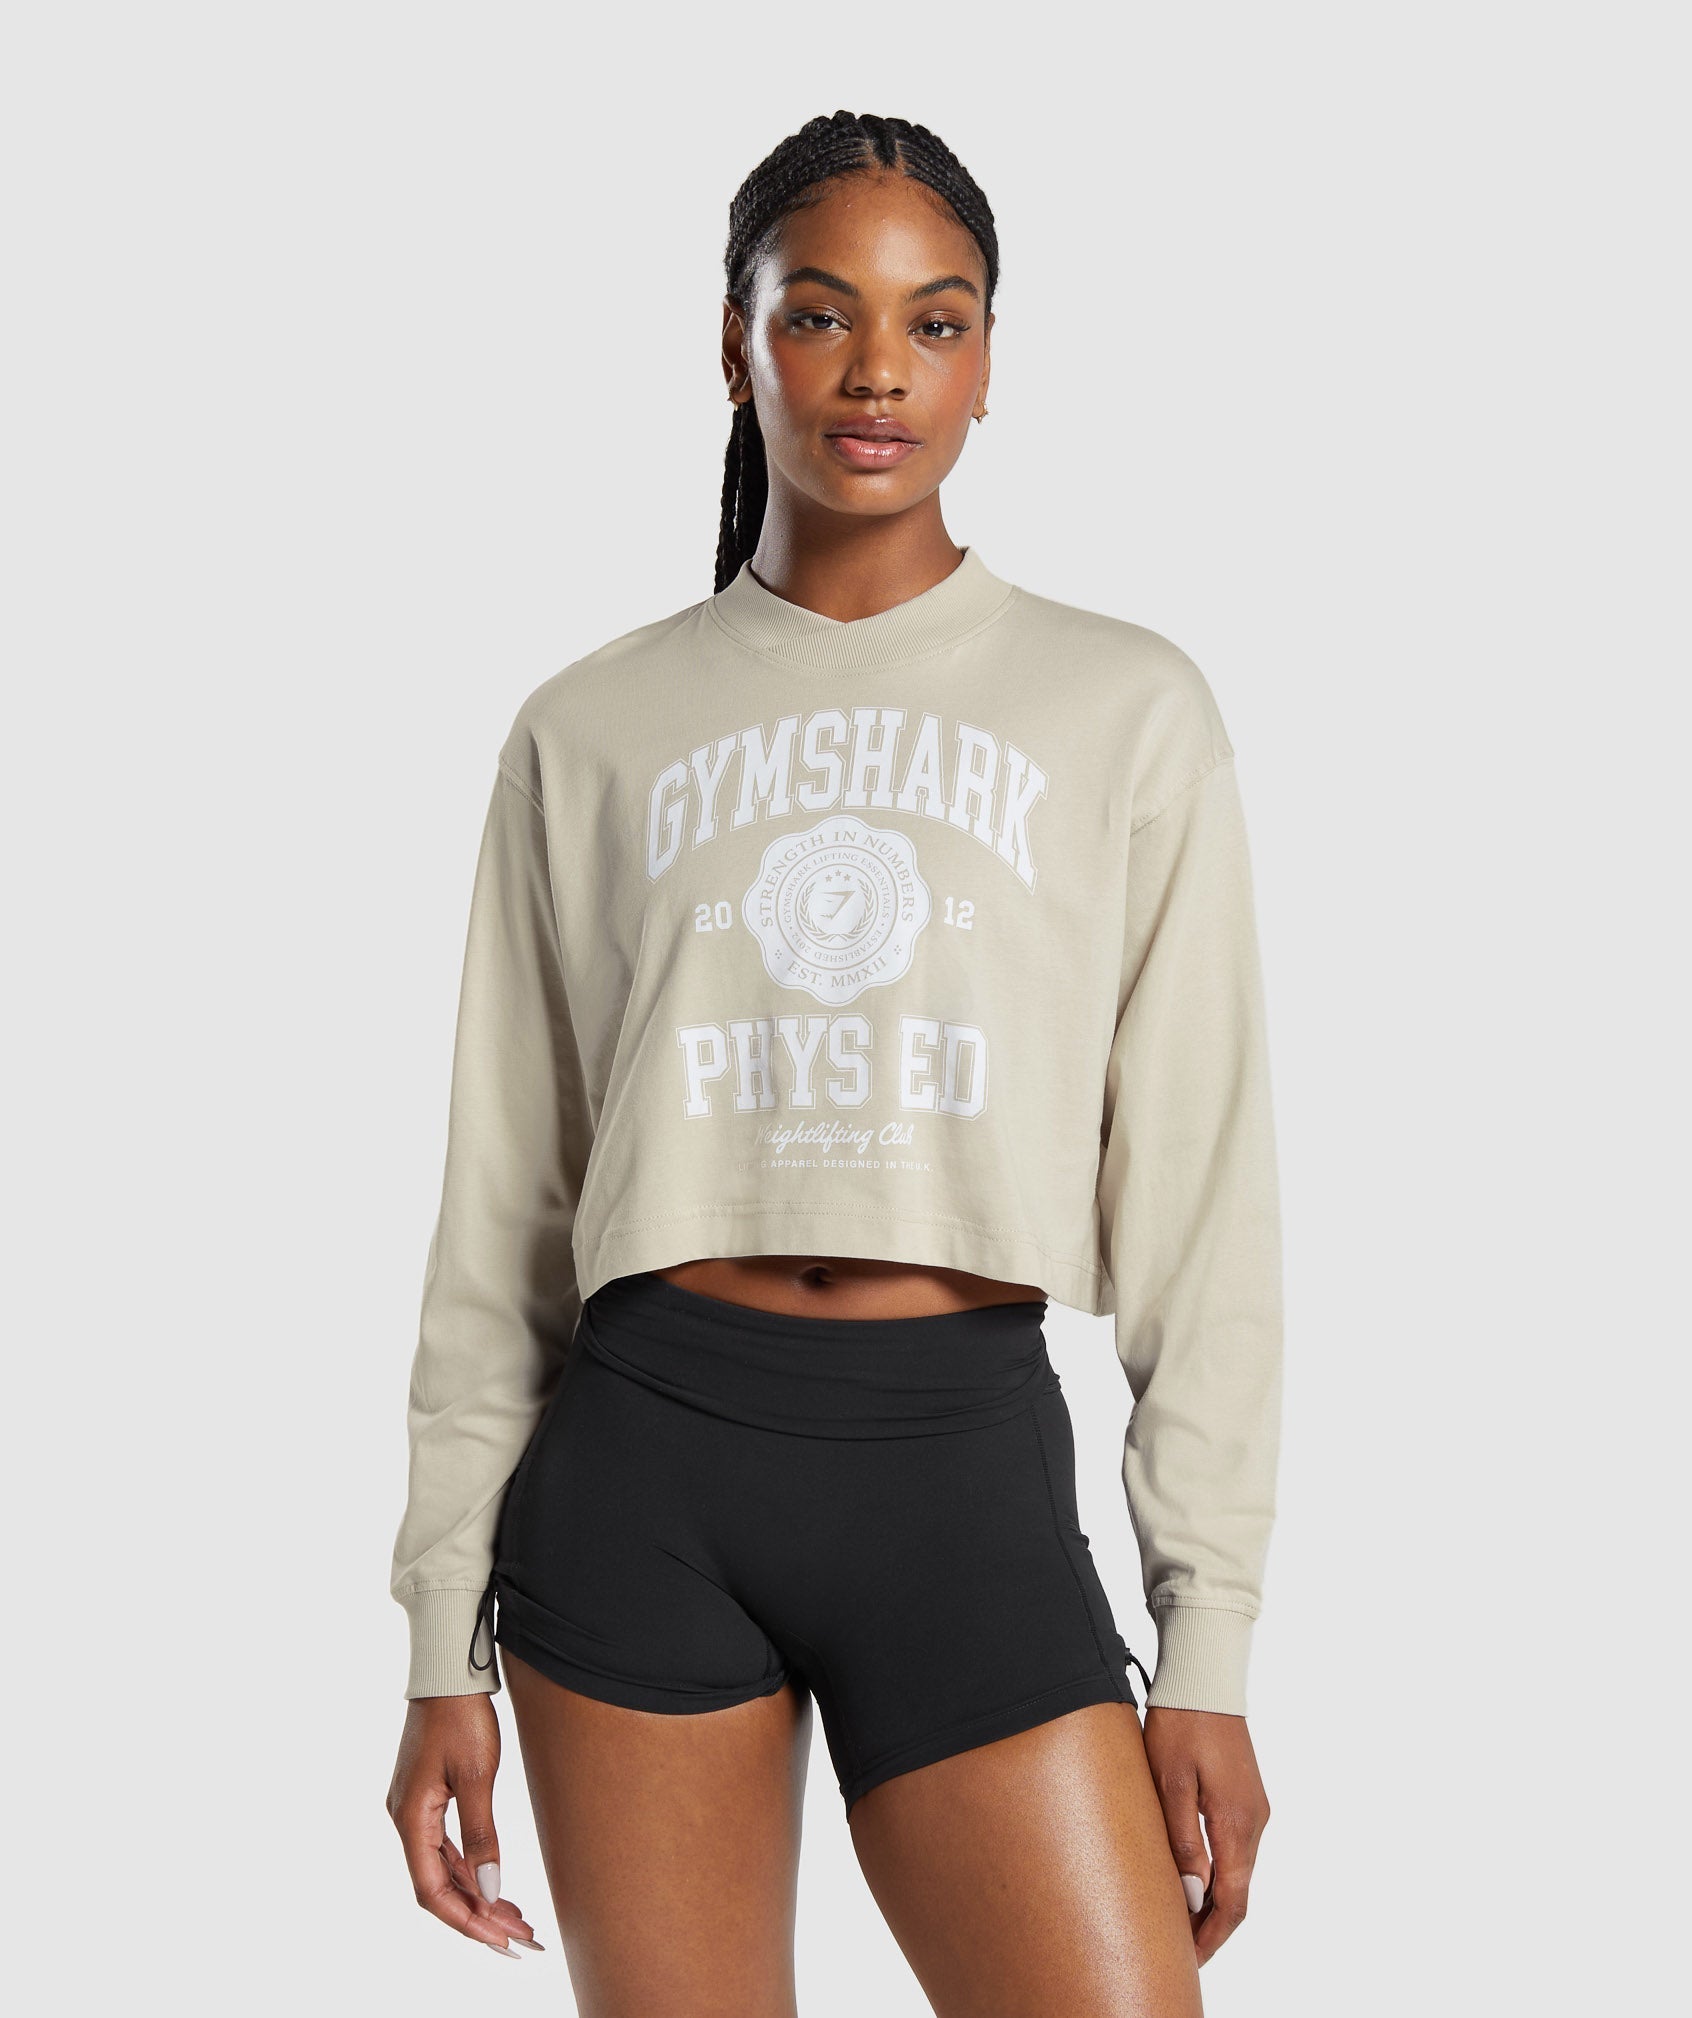 Phys Ed Graphic Long Sleeve T-Shirt in Pebble Grey - view 1